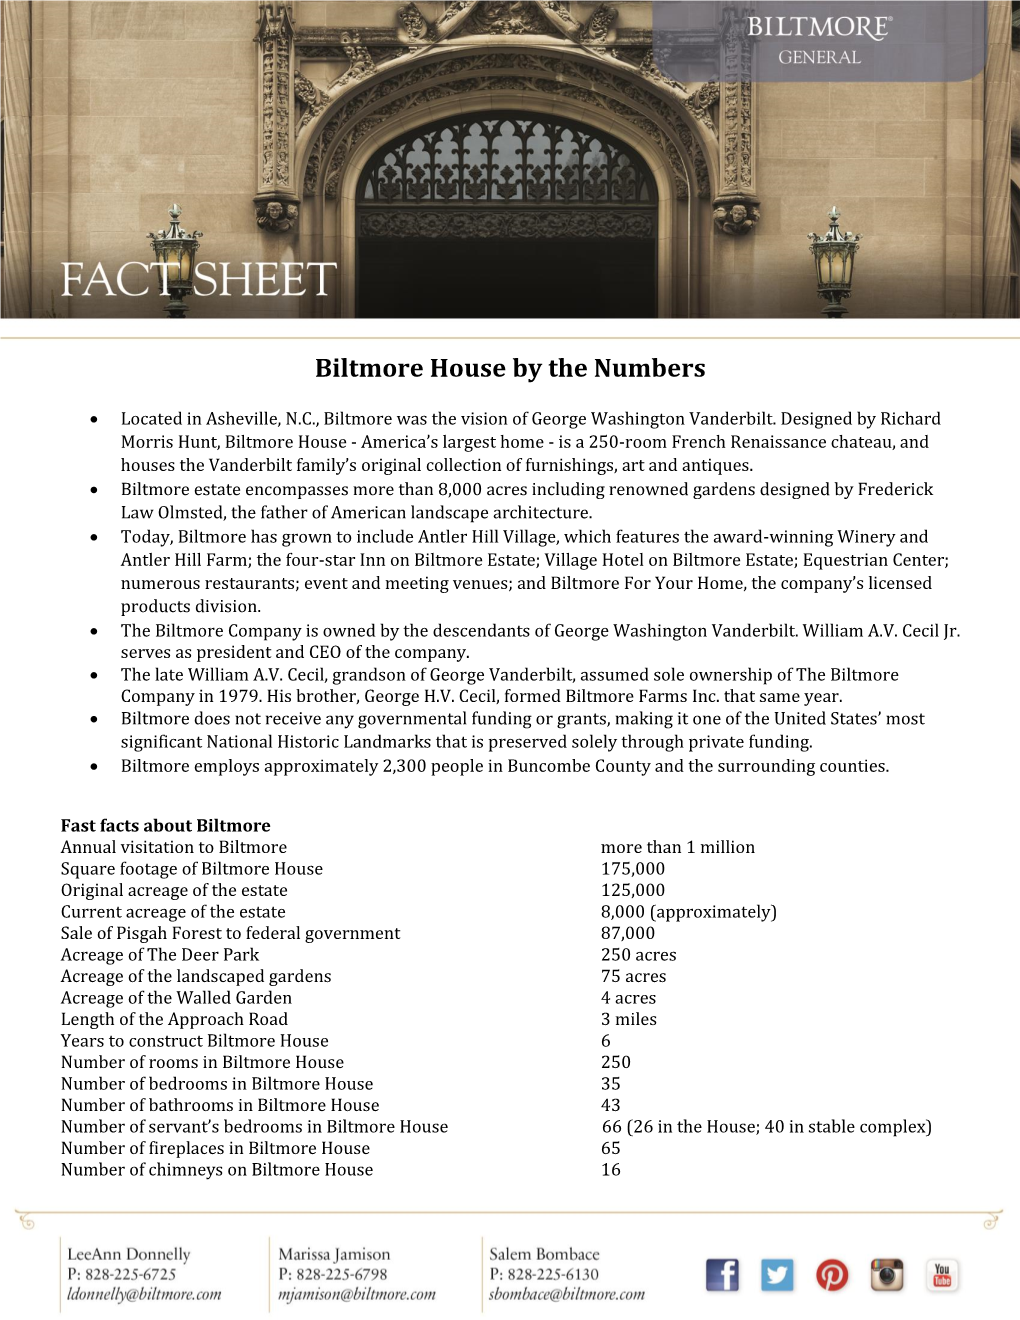 Biltmore House by the Numbers